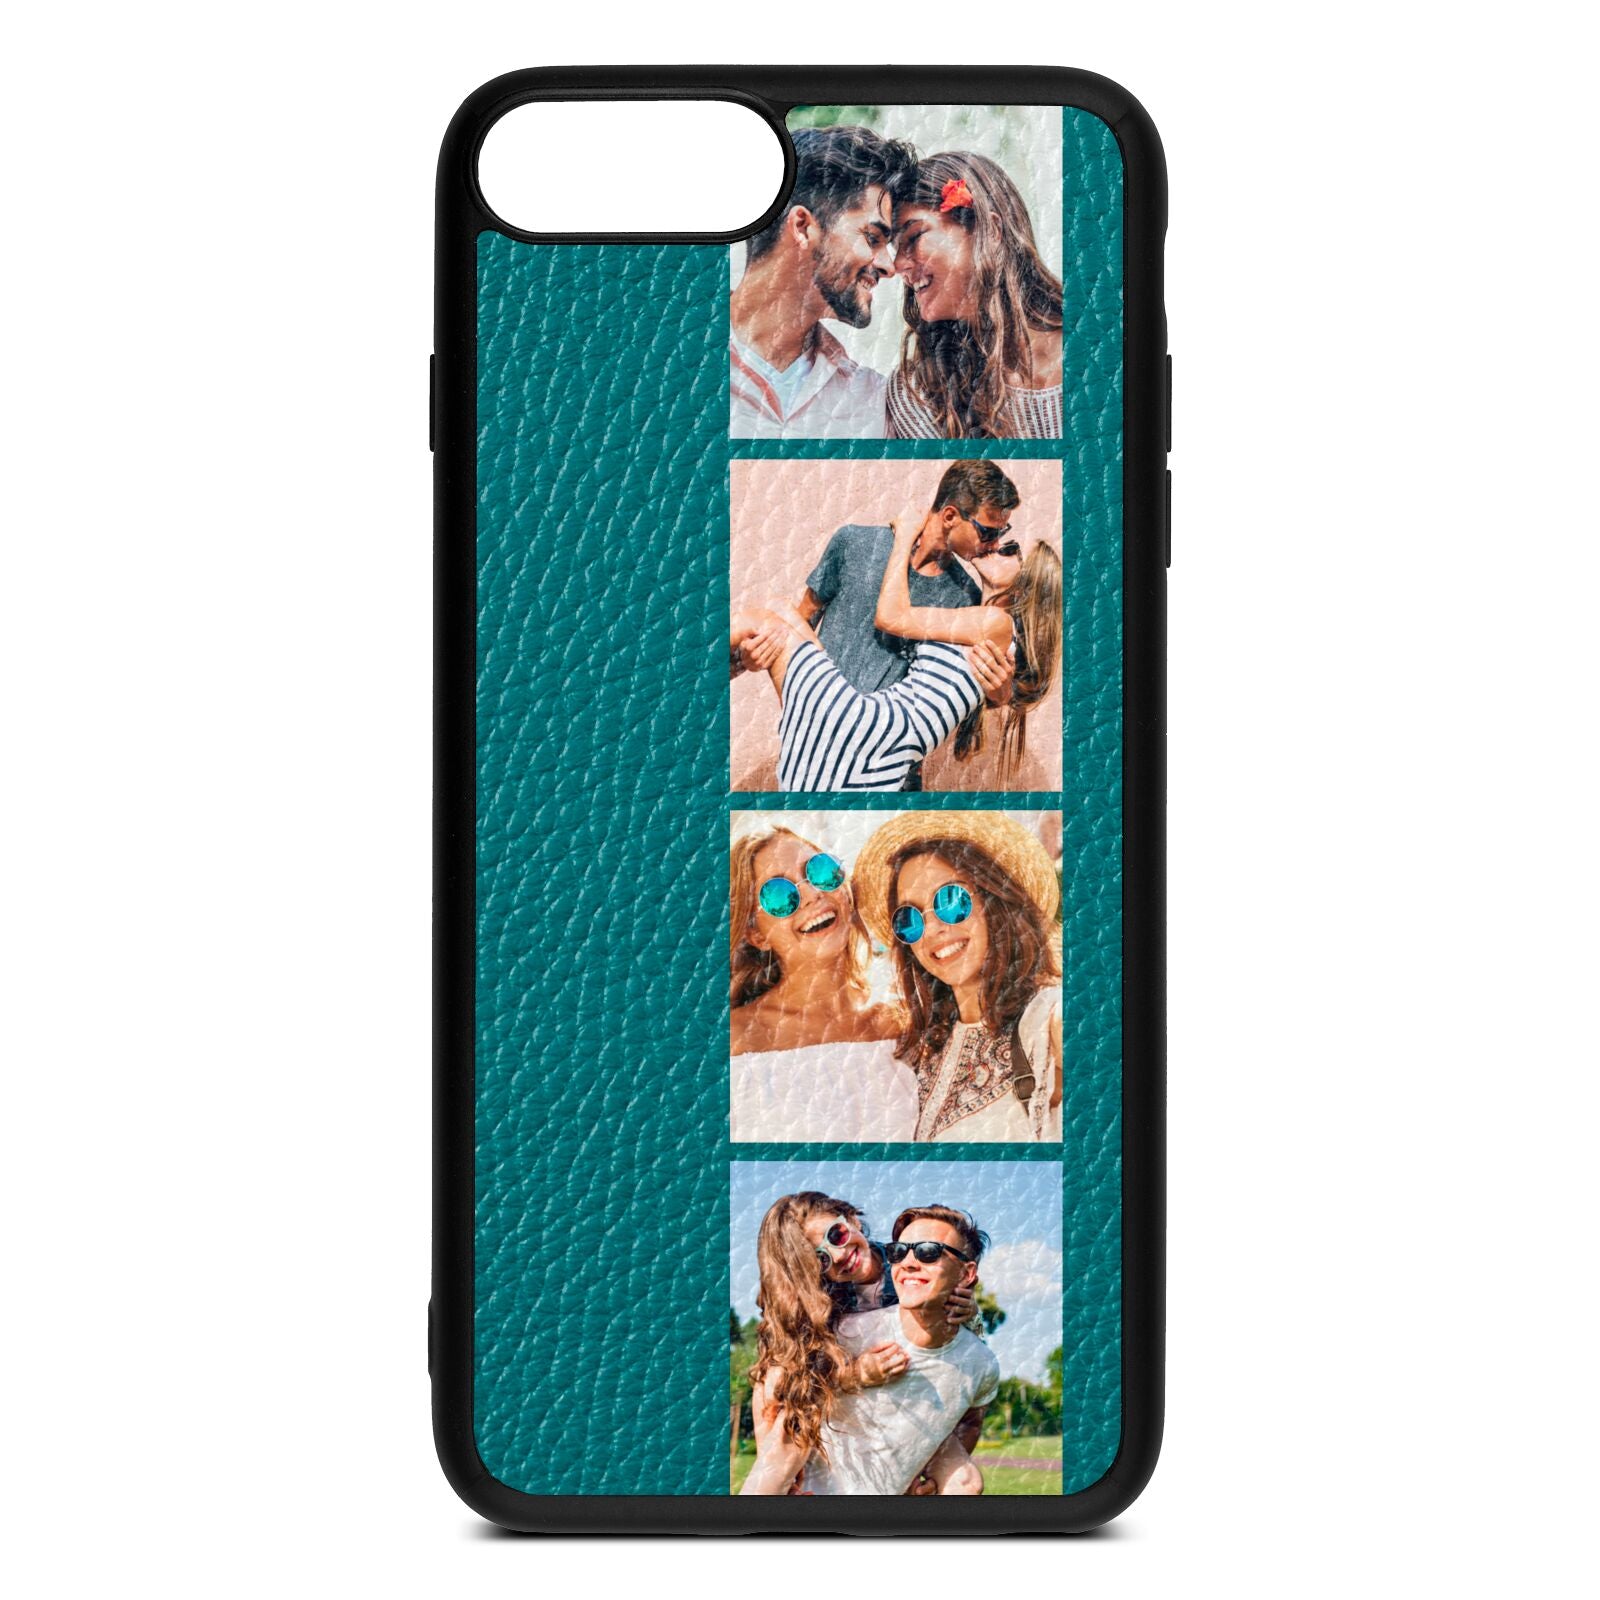 Photo Strip Montage Upload Green Pebble Leather iPhone 8 Plus Case